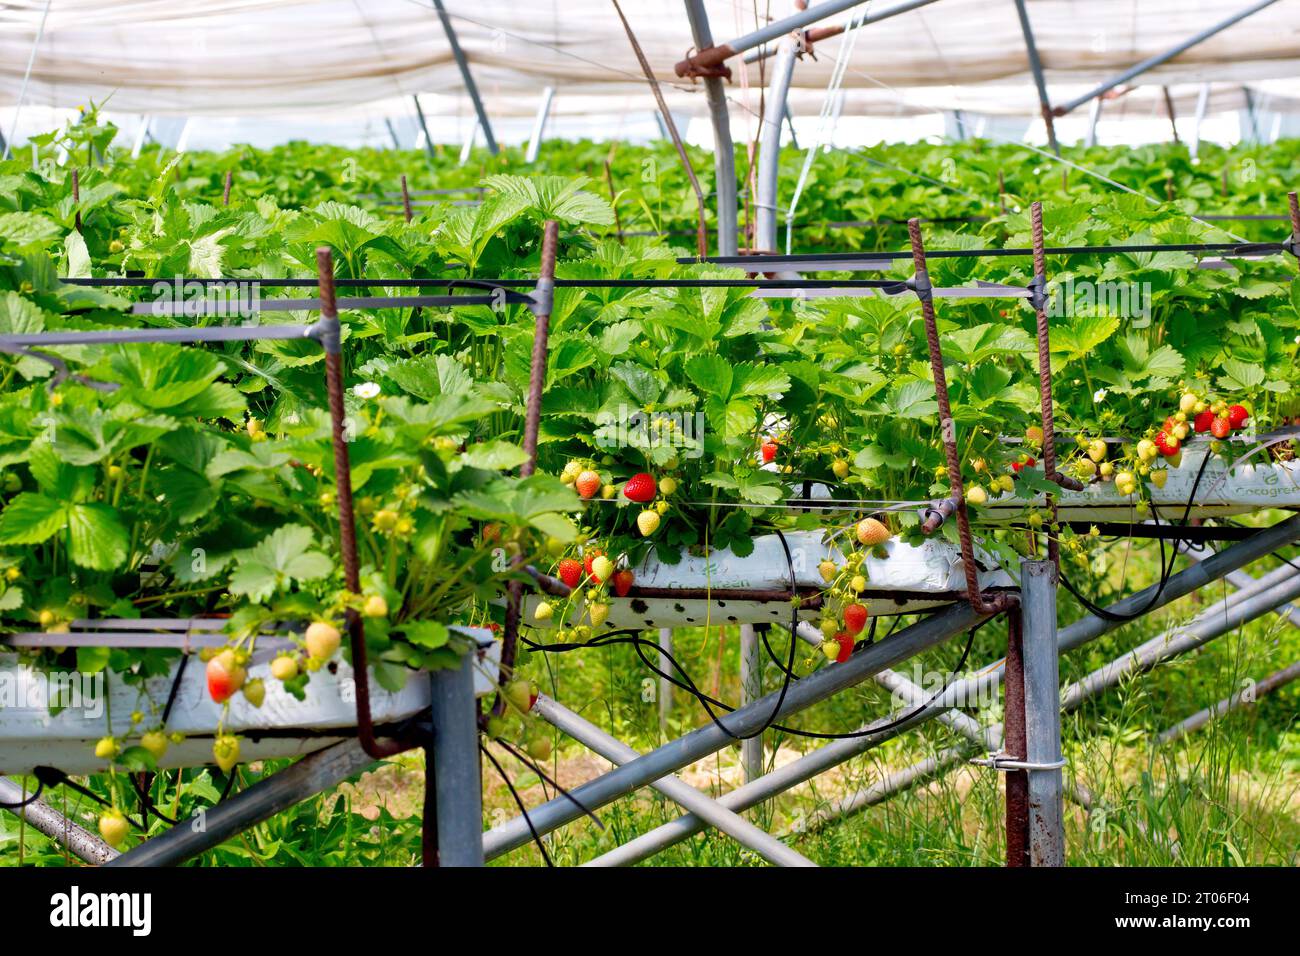 A view inside a polytunnel showing makeshift metal benches holding compost bags with huge numbers of strawberry plants, the fruit beginning to ripen. Stock Photo